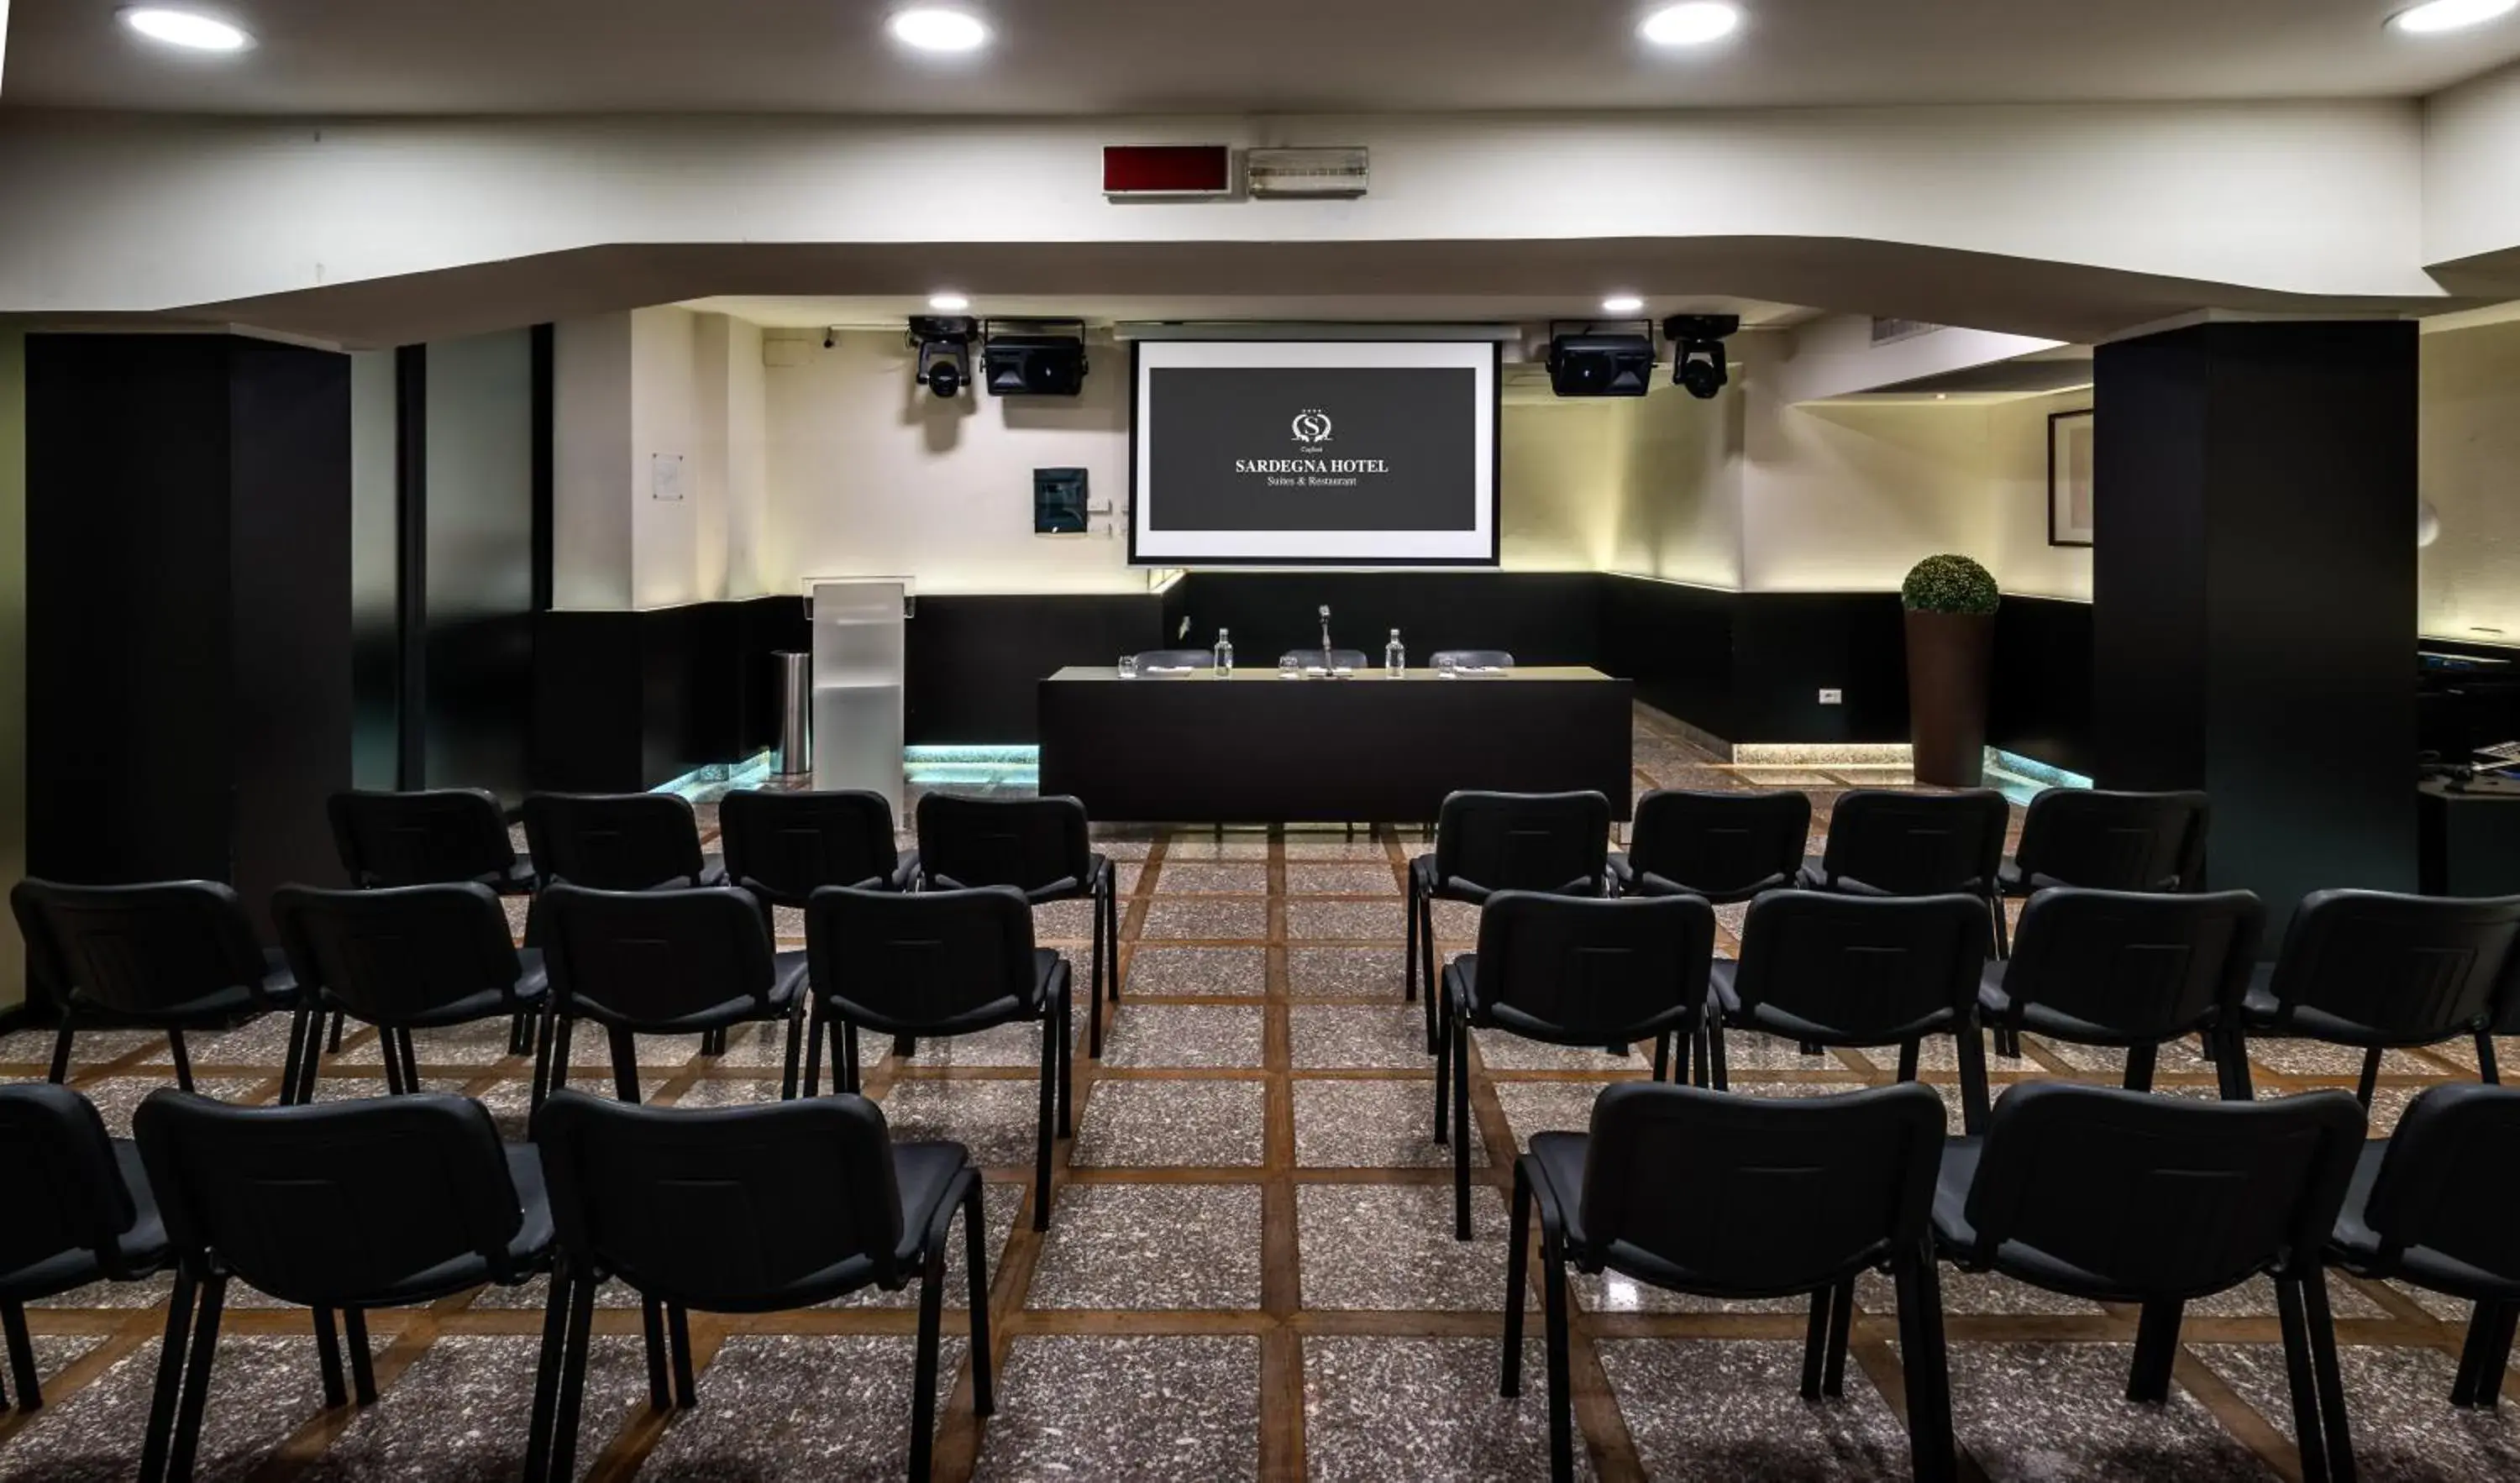 Meeting/conference room in Sardegna Hotel - Suites & Restaurant